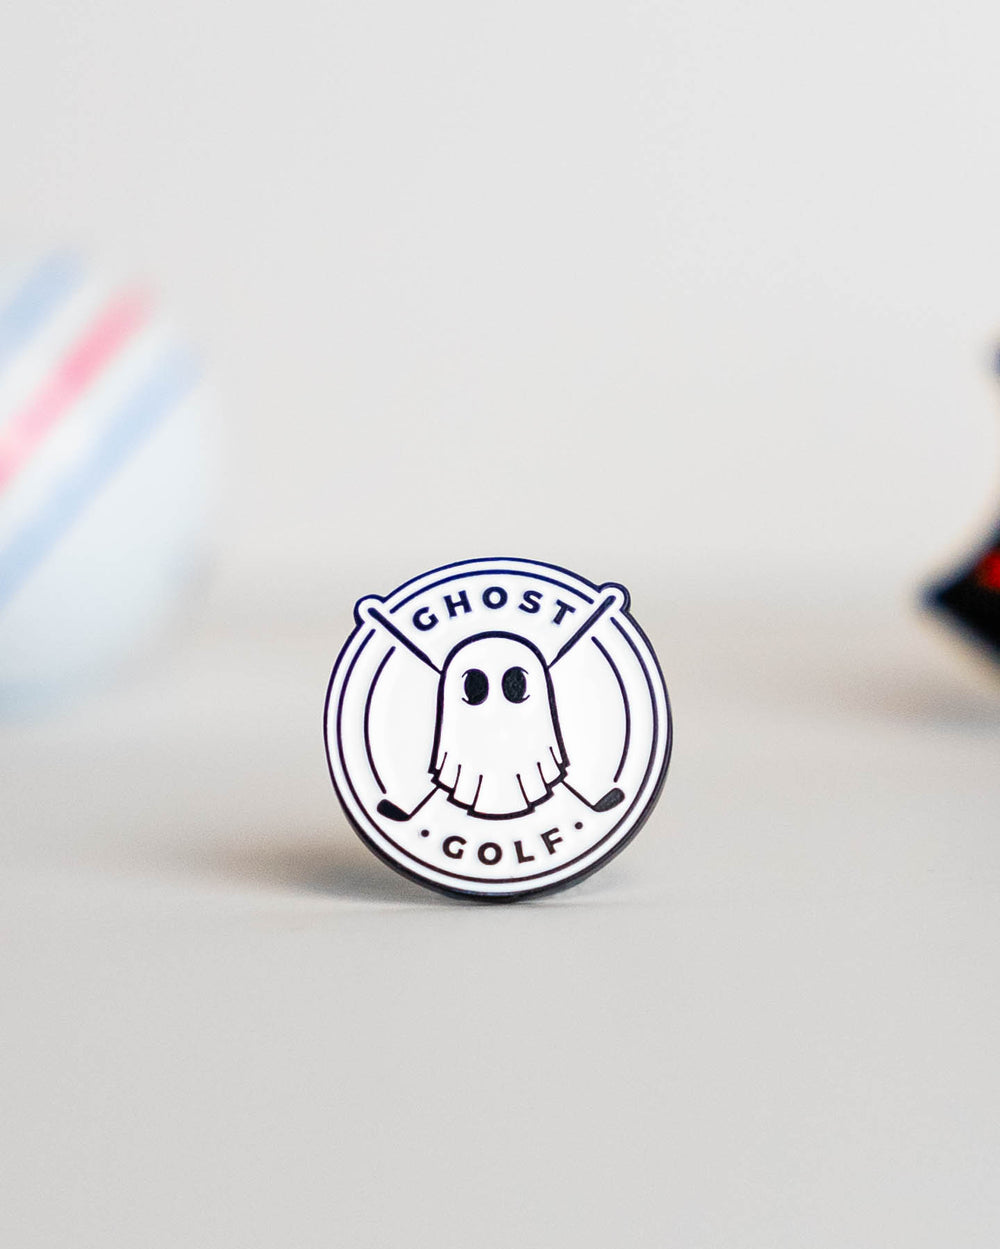 Golf Ball Marker White Circle with Black Ghost Logo